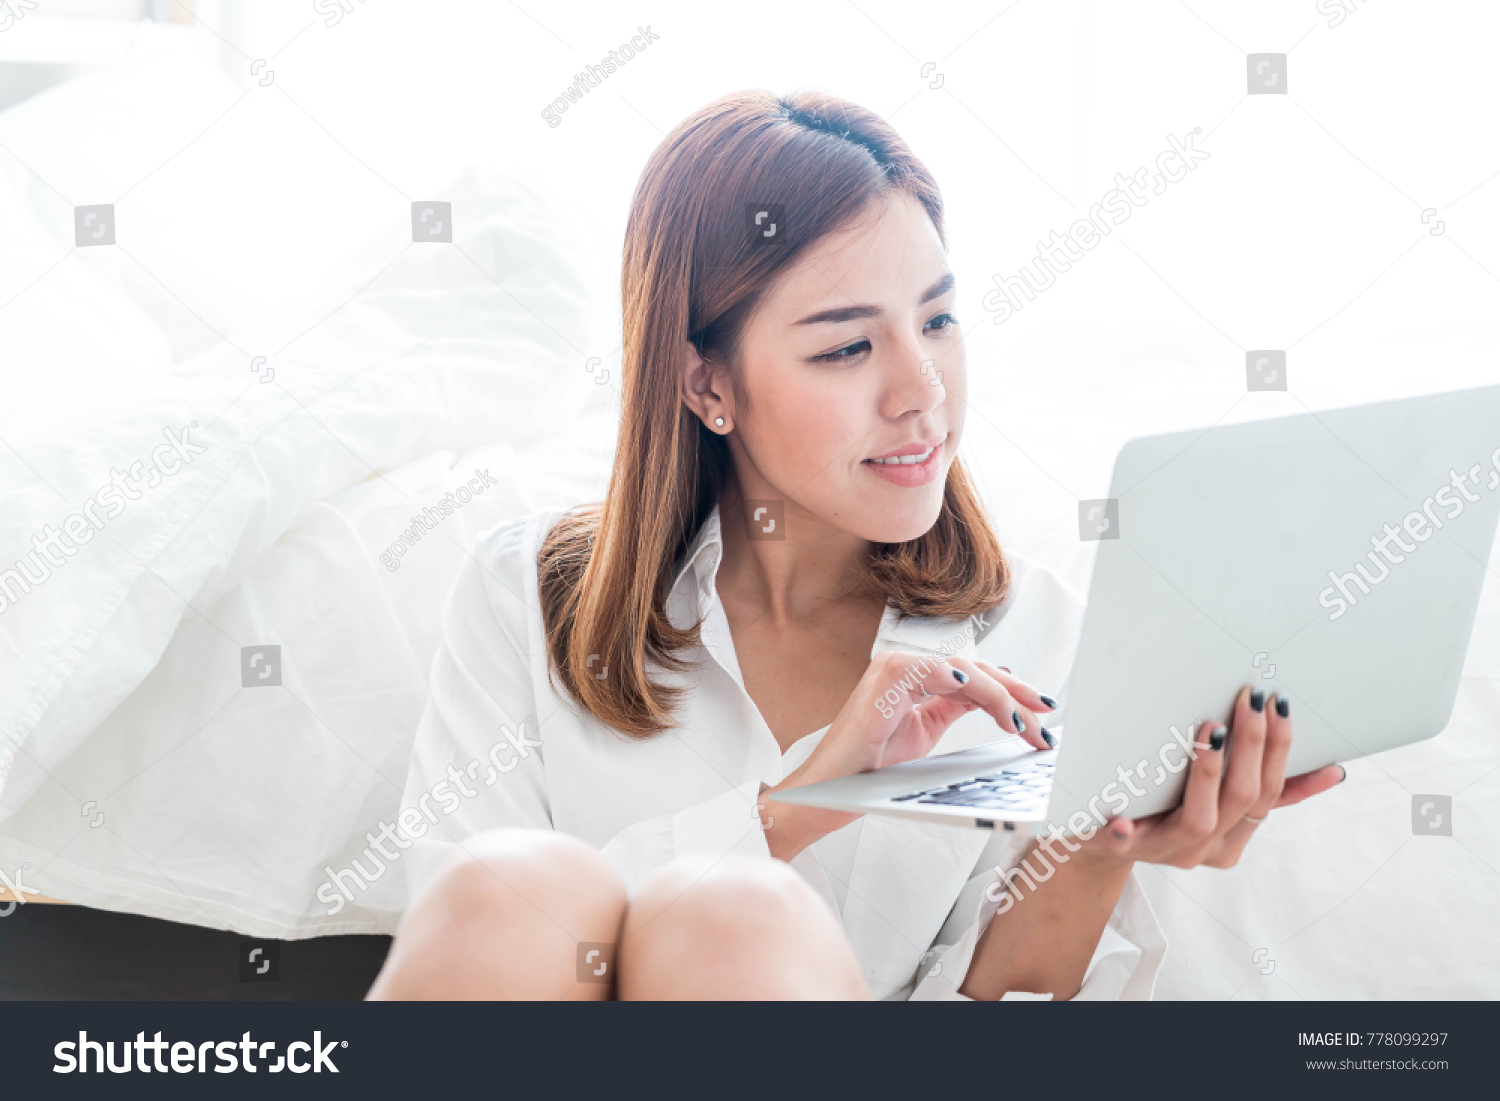 Beautiful asian woman working at home with laptop and telephone #778099297